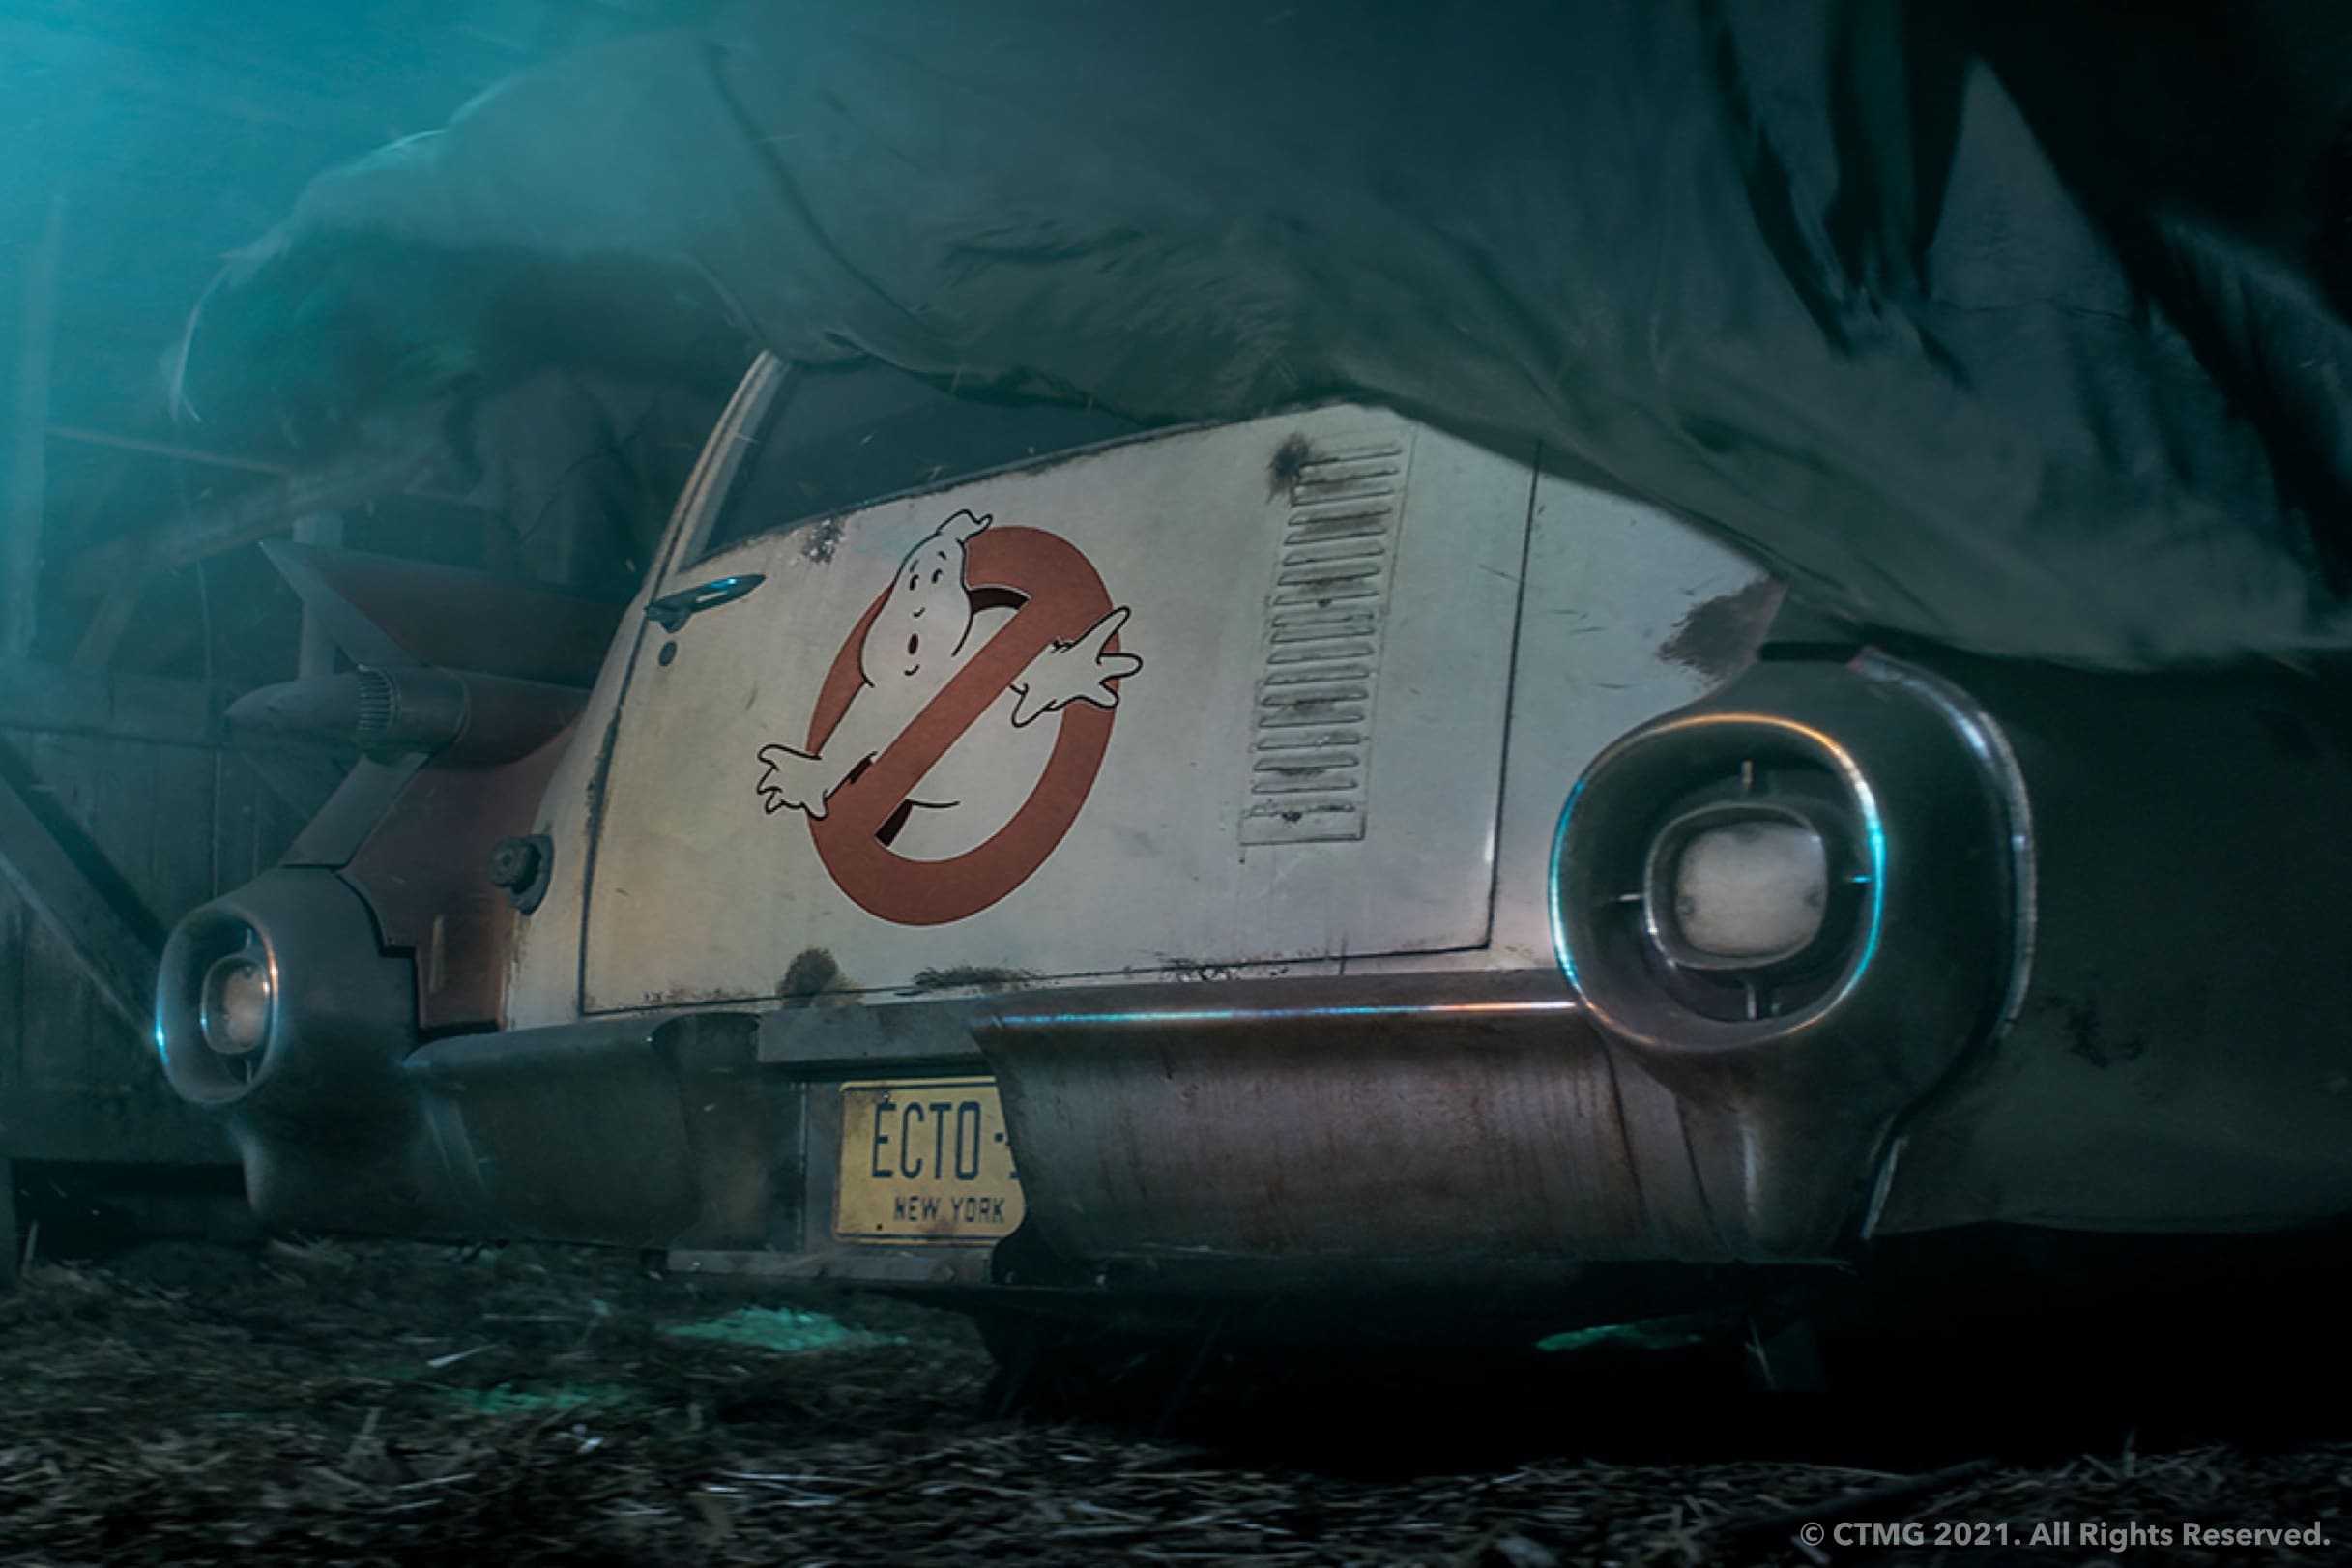 Ghostbusters Afterlife 2021 Movie Art Wallpapers